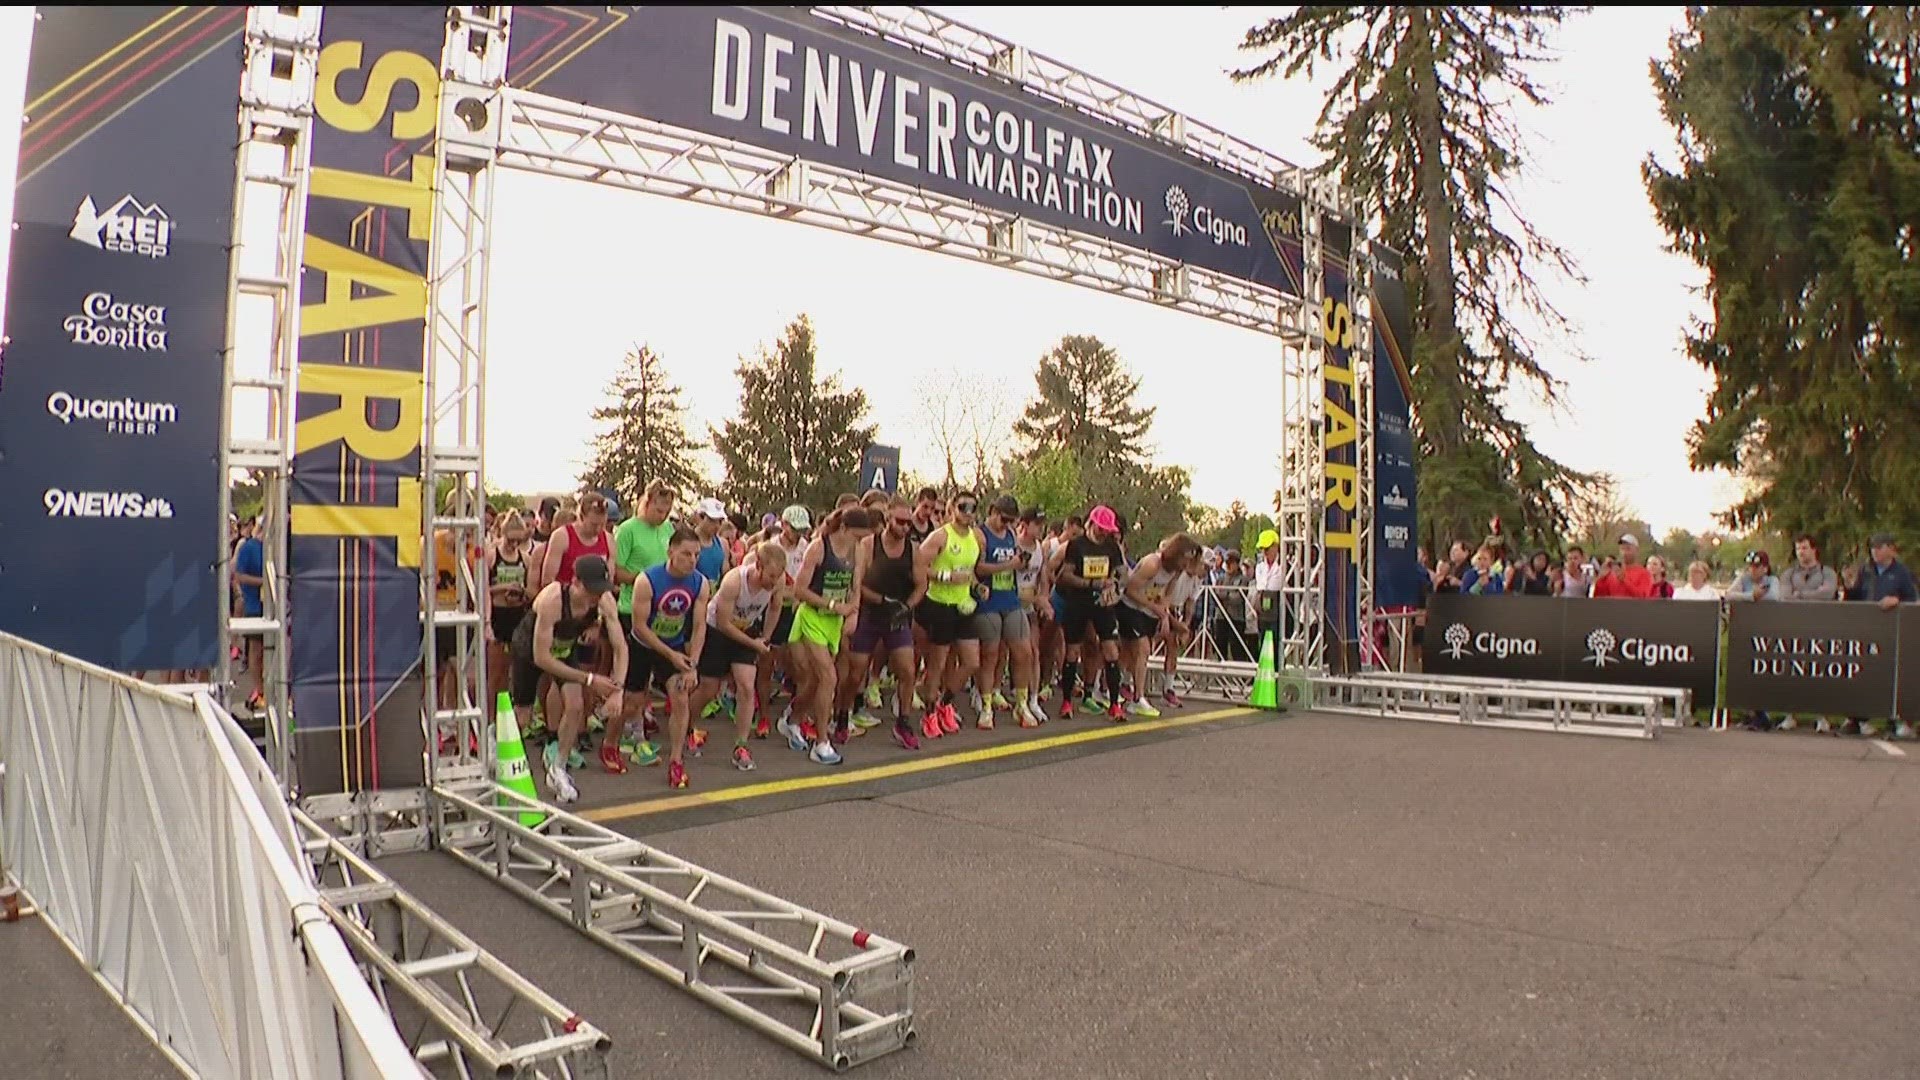 The 18th annual Denver Colfax Marathon weekend will be held Friday, May 17, through Sunday, May 19.